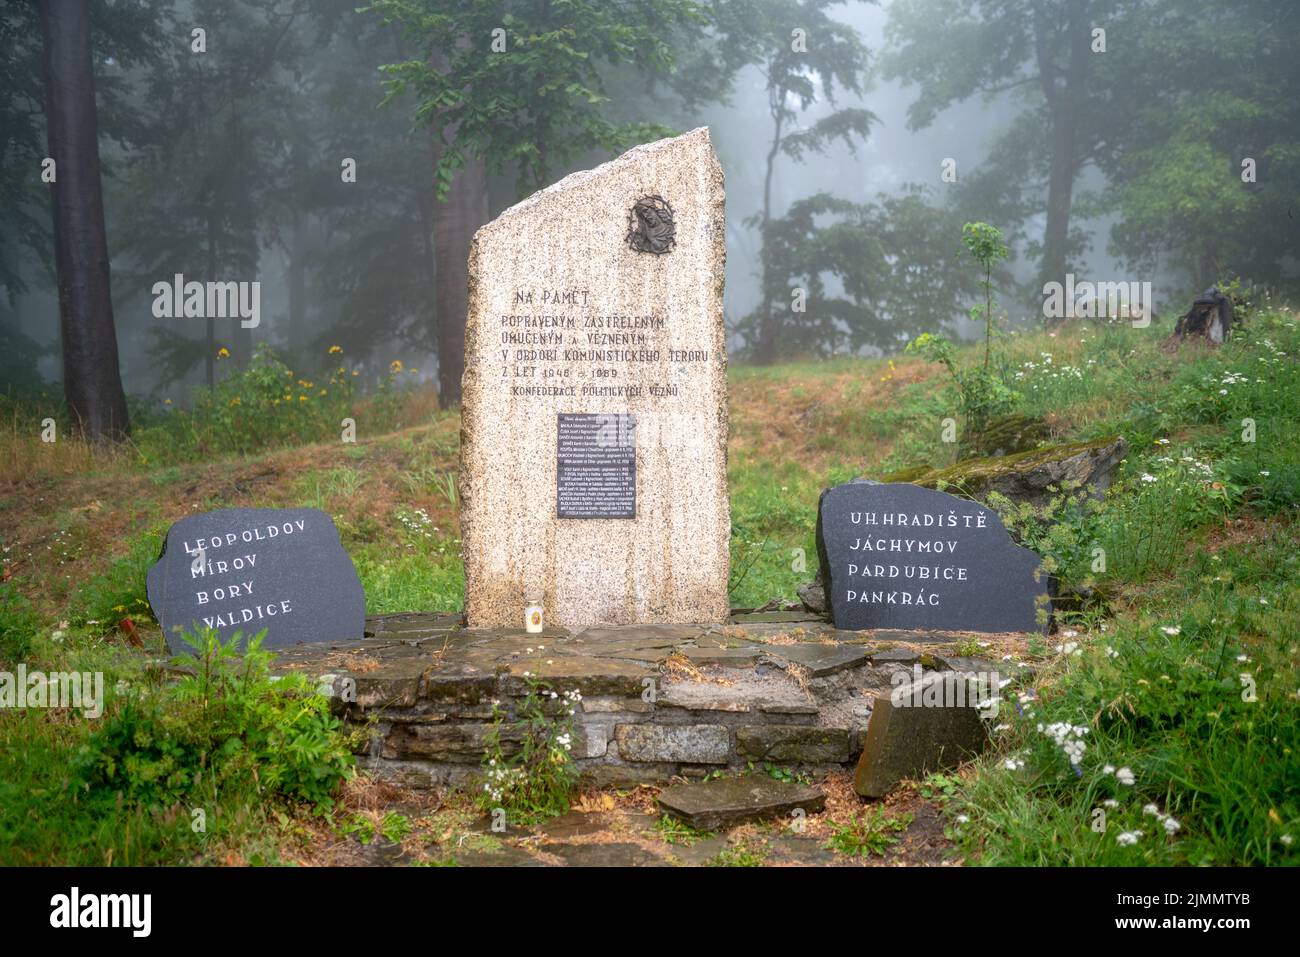 Memorial to victims of communist regime. Located at Mount Hostýn, Moravia. Commemorates both local victims and prisons used by communist regime. Stock Photo